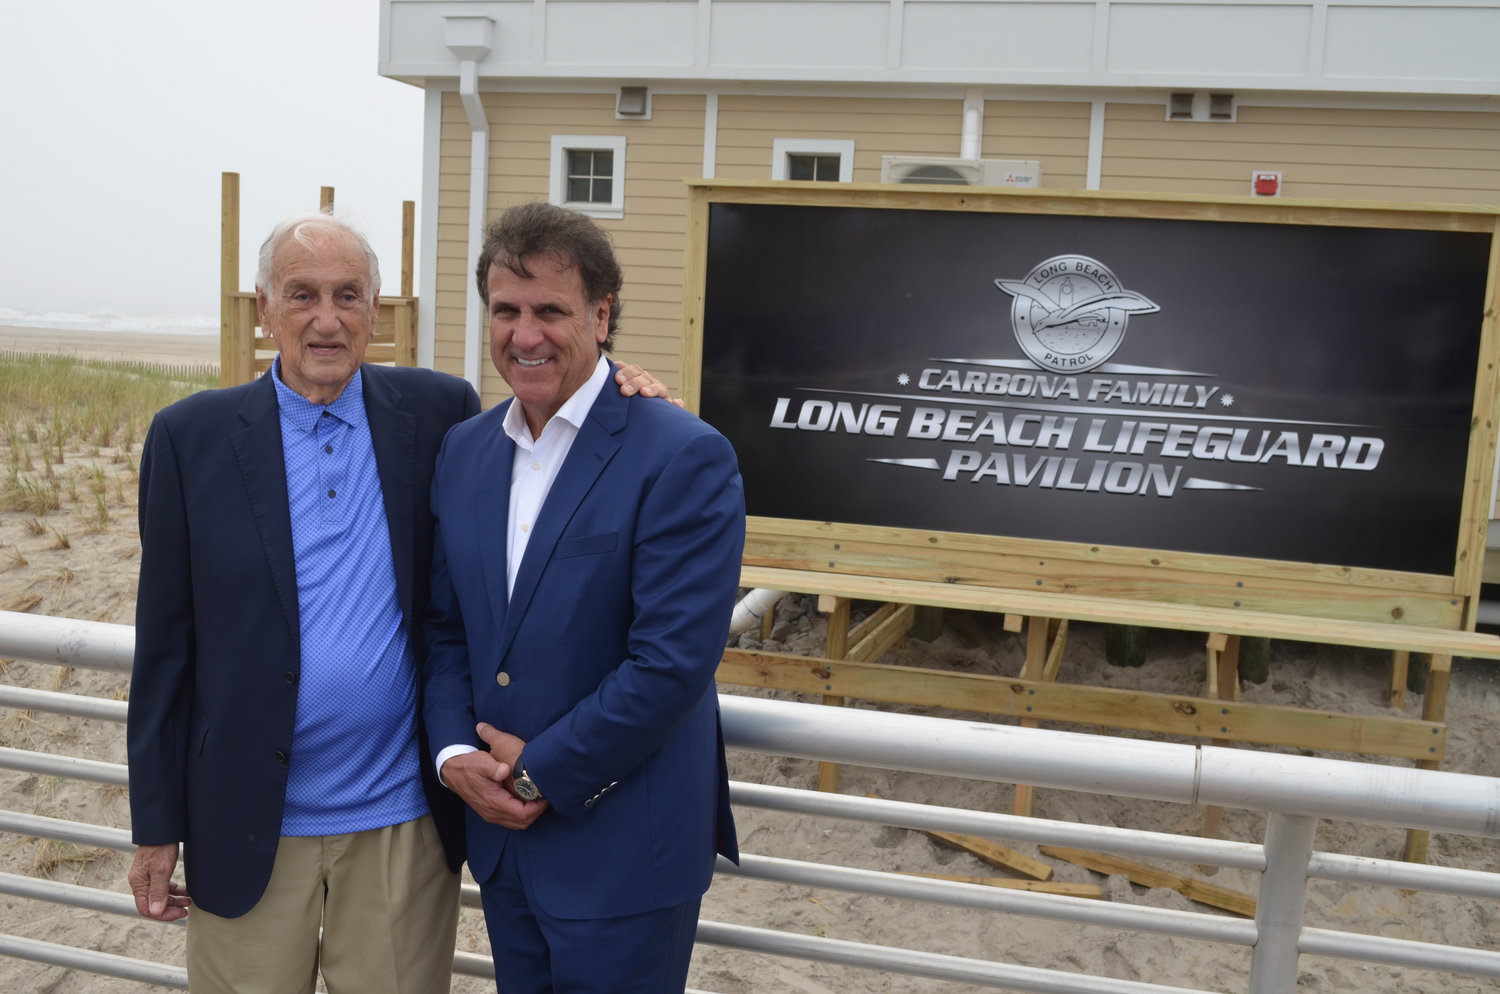 The new lifeguard pavilion in Long Beach was named after the Carbona family, which donated $300,000 for its construction.